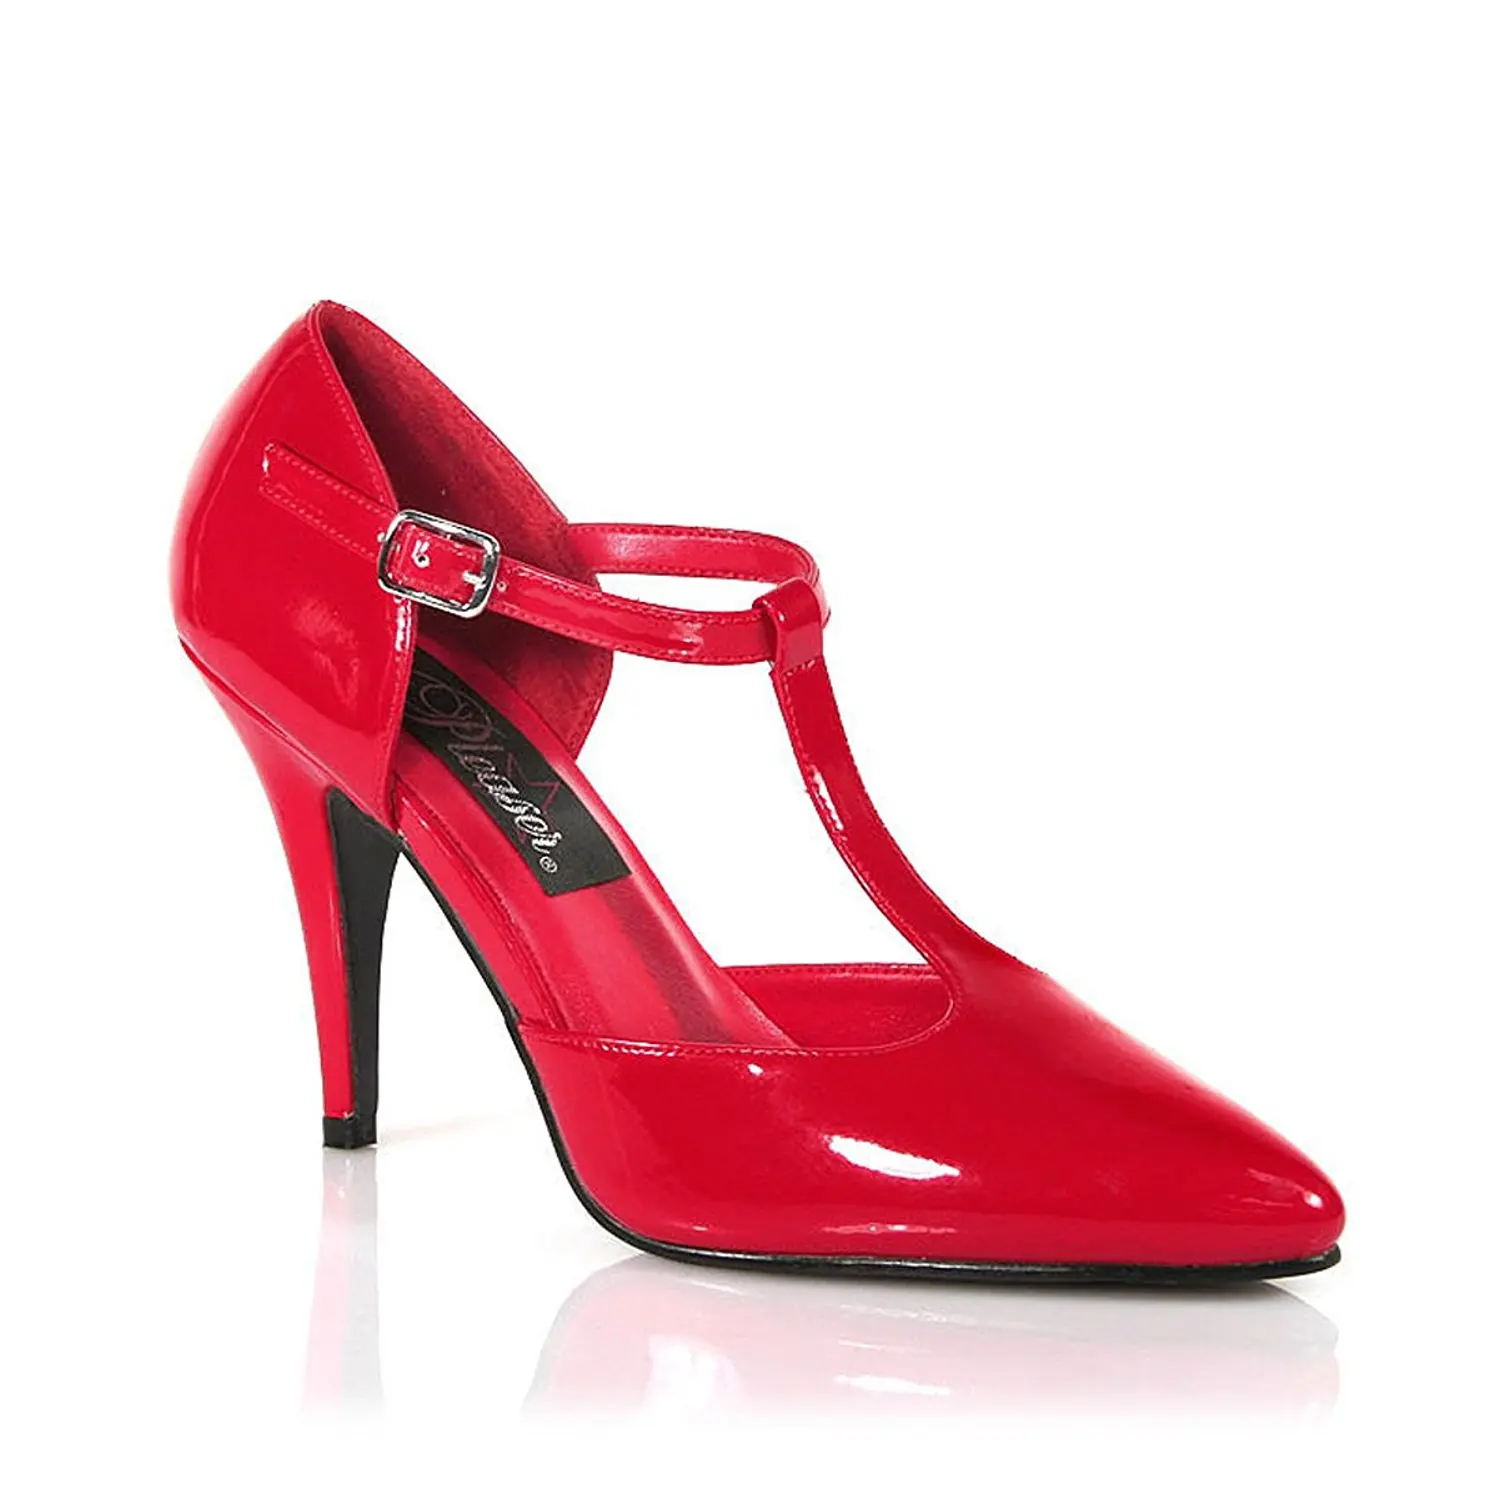 Cheap 3 Inch Red Pumps, find 3 Inch Red Pumps deals on line at Alibaba.com